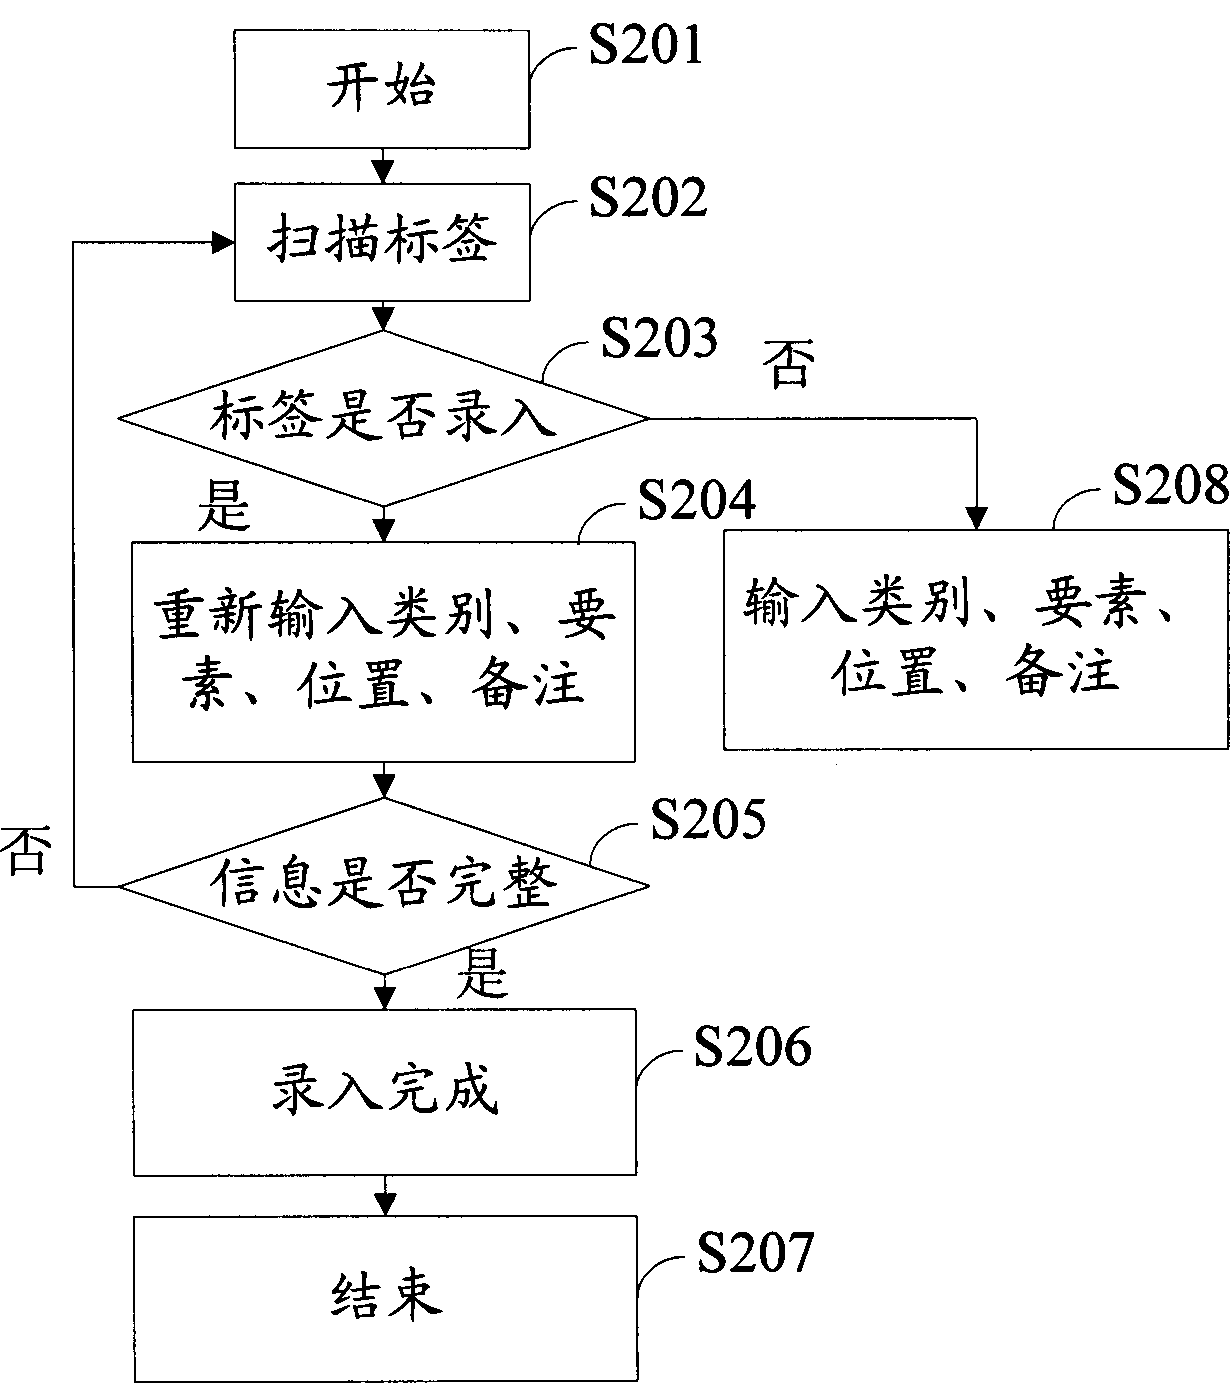 Fire-fighting equipment information processing system and method based on PDA (Personal Digital Assistant)